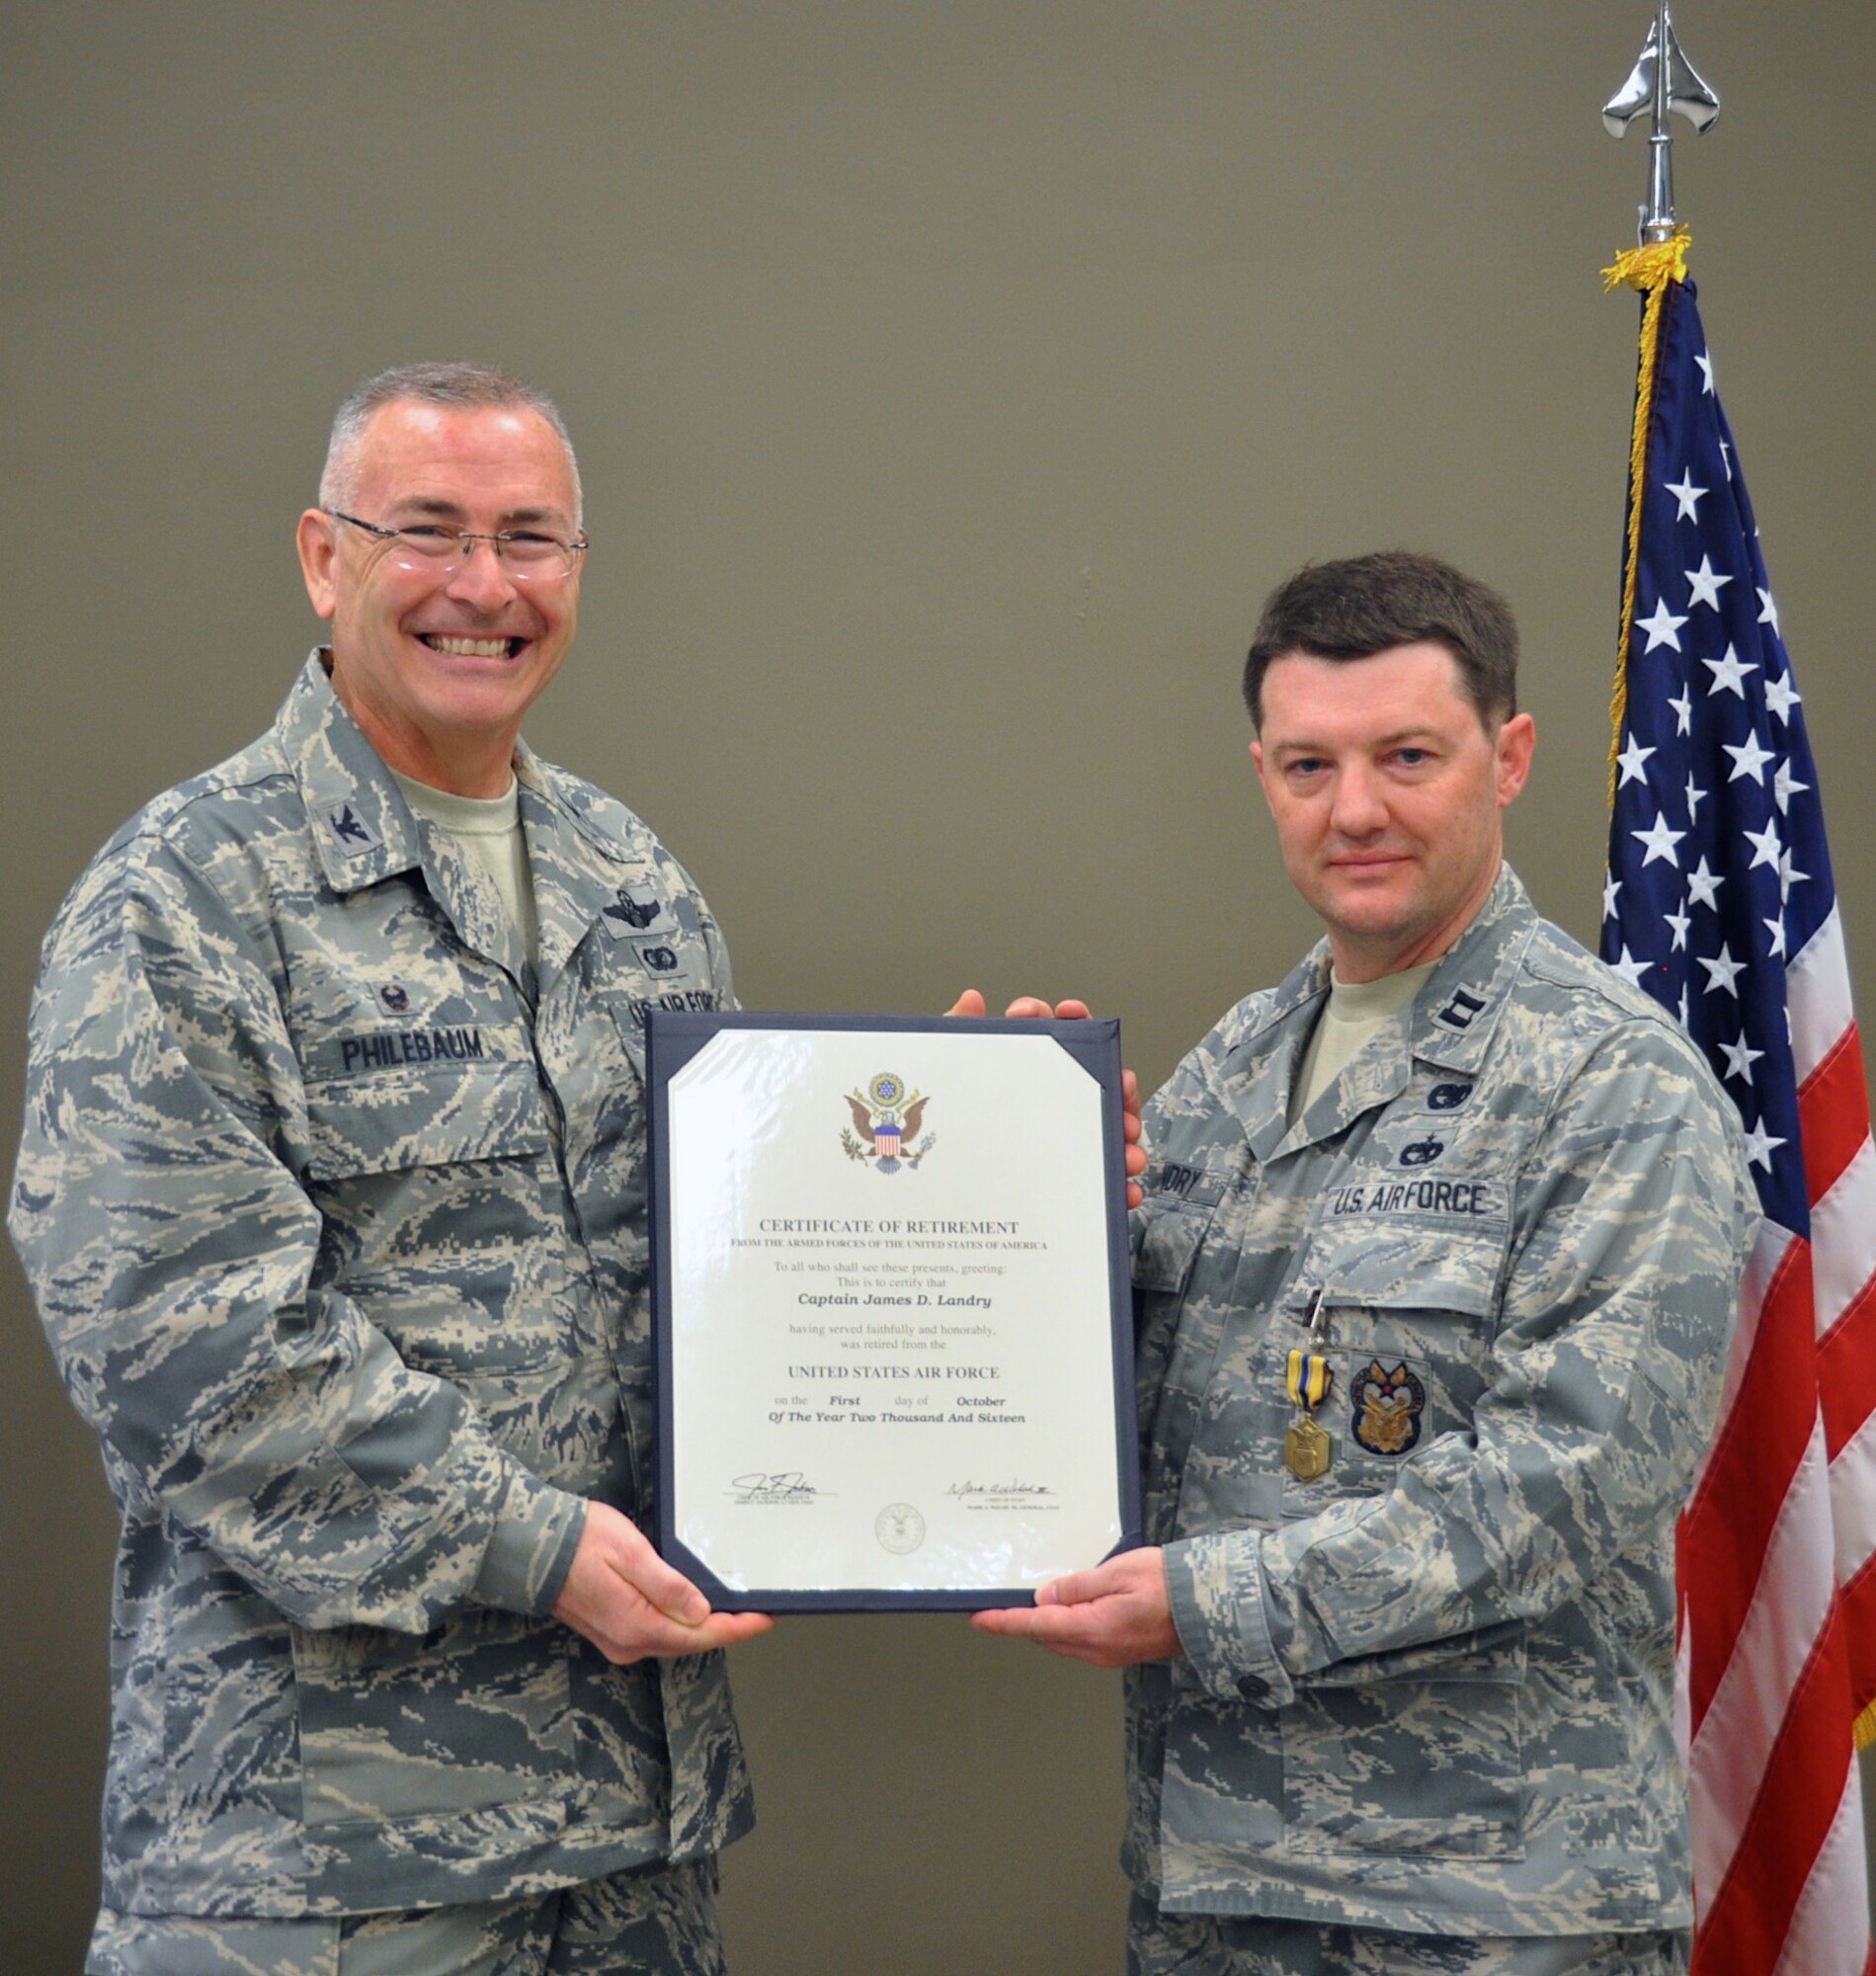 Capt. James Landry, right, and Col. Jonathan Philebaum, left, 932nd Airlift Wing commander, hold Landry's certificate of retirement during his retirement ceremony Sep. 11, 2016, Scott Air Force Base, Illinois.  Landry joined in 1992 and served 23 total years in the Air Force.  He was presented the Air Force Commendation Medal and several tokens of appreciation from co-workers during the ceremony. Landry's final Air Force assignment was with the 932nd AW Inspectors General Office.  (U.S. Air Force photo by Tech. Sgt. Jodi Ames)